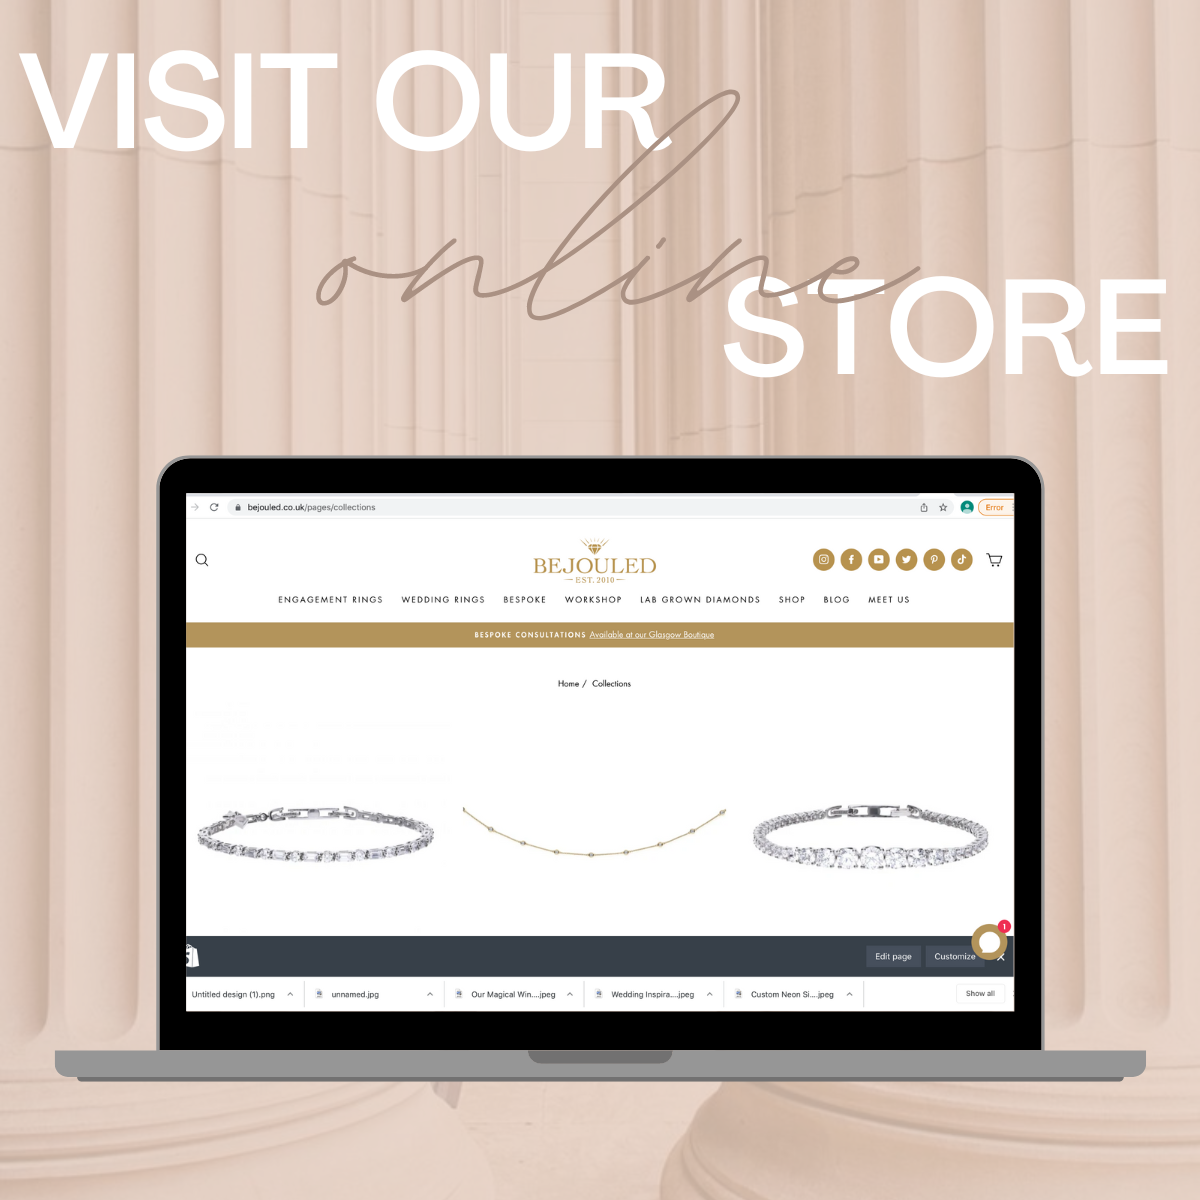 Visit our online store